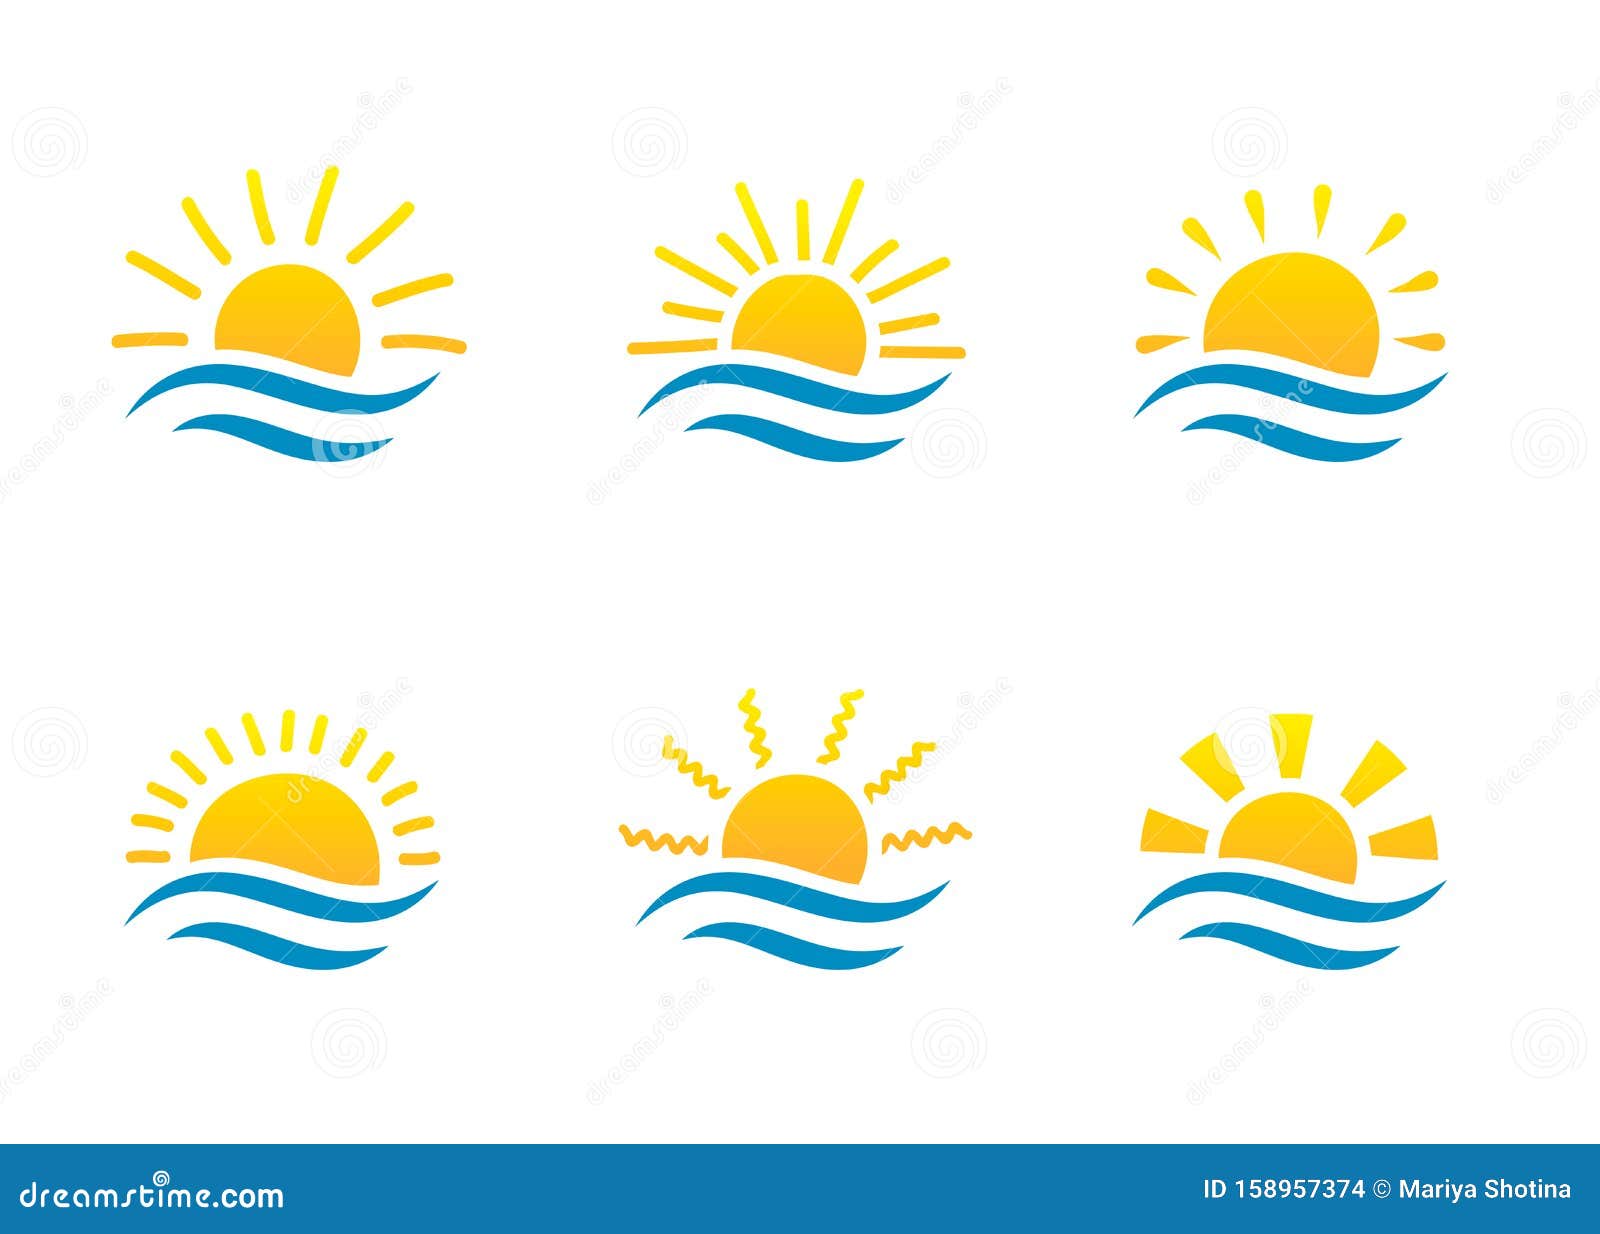 Sunrise and Sea Cartoon Logo Temlates Collection. Water Waves and Sunbeam  Icons Set Stock Vector - Illustration of sunny, retro: 158957374